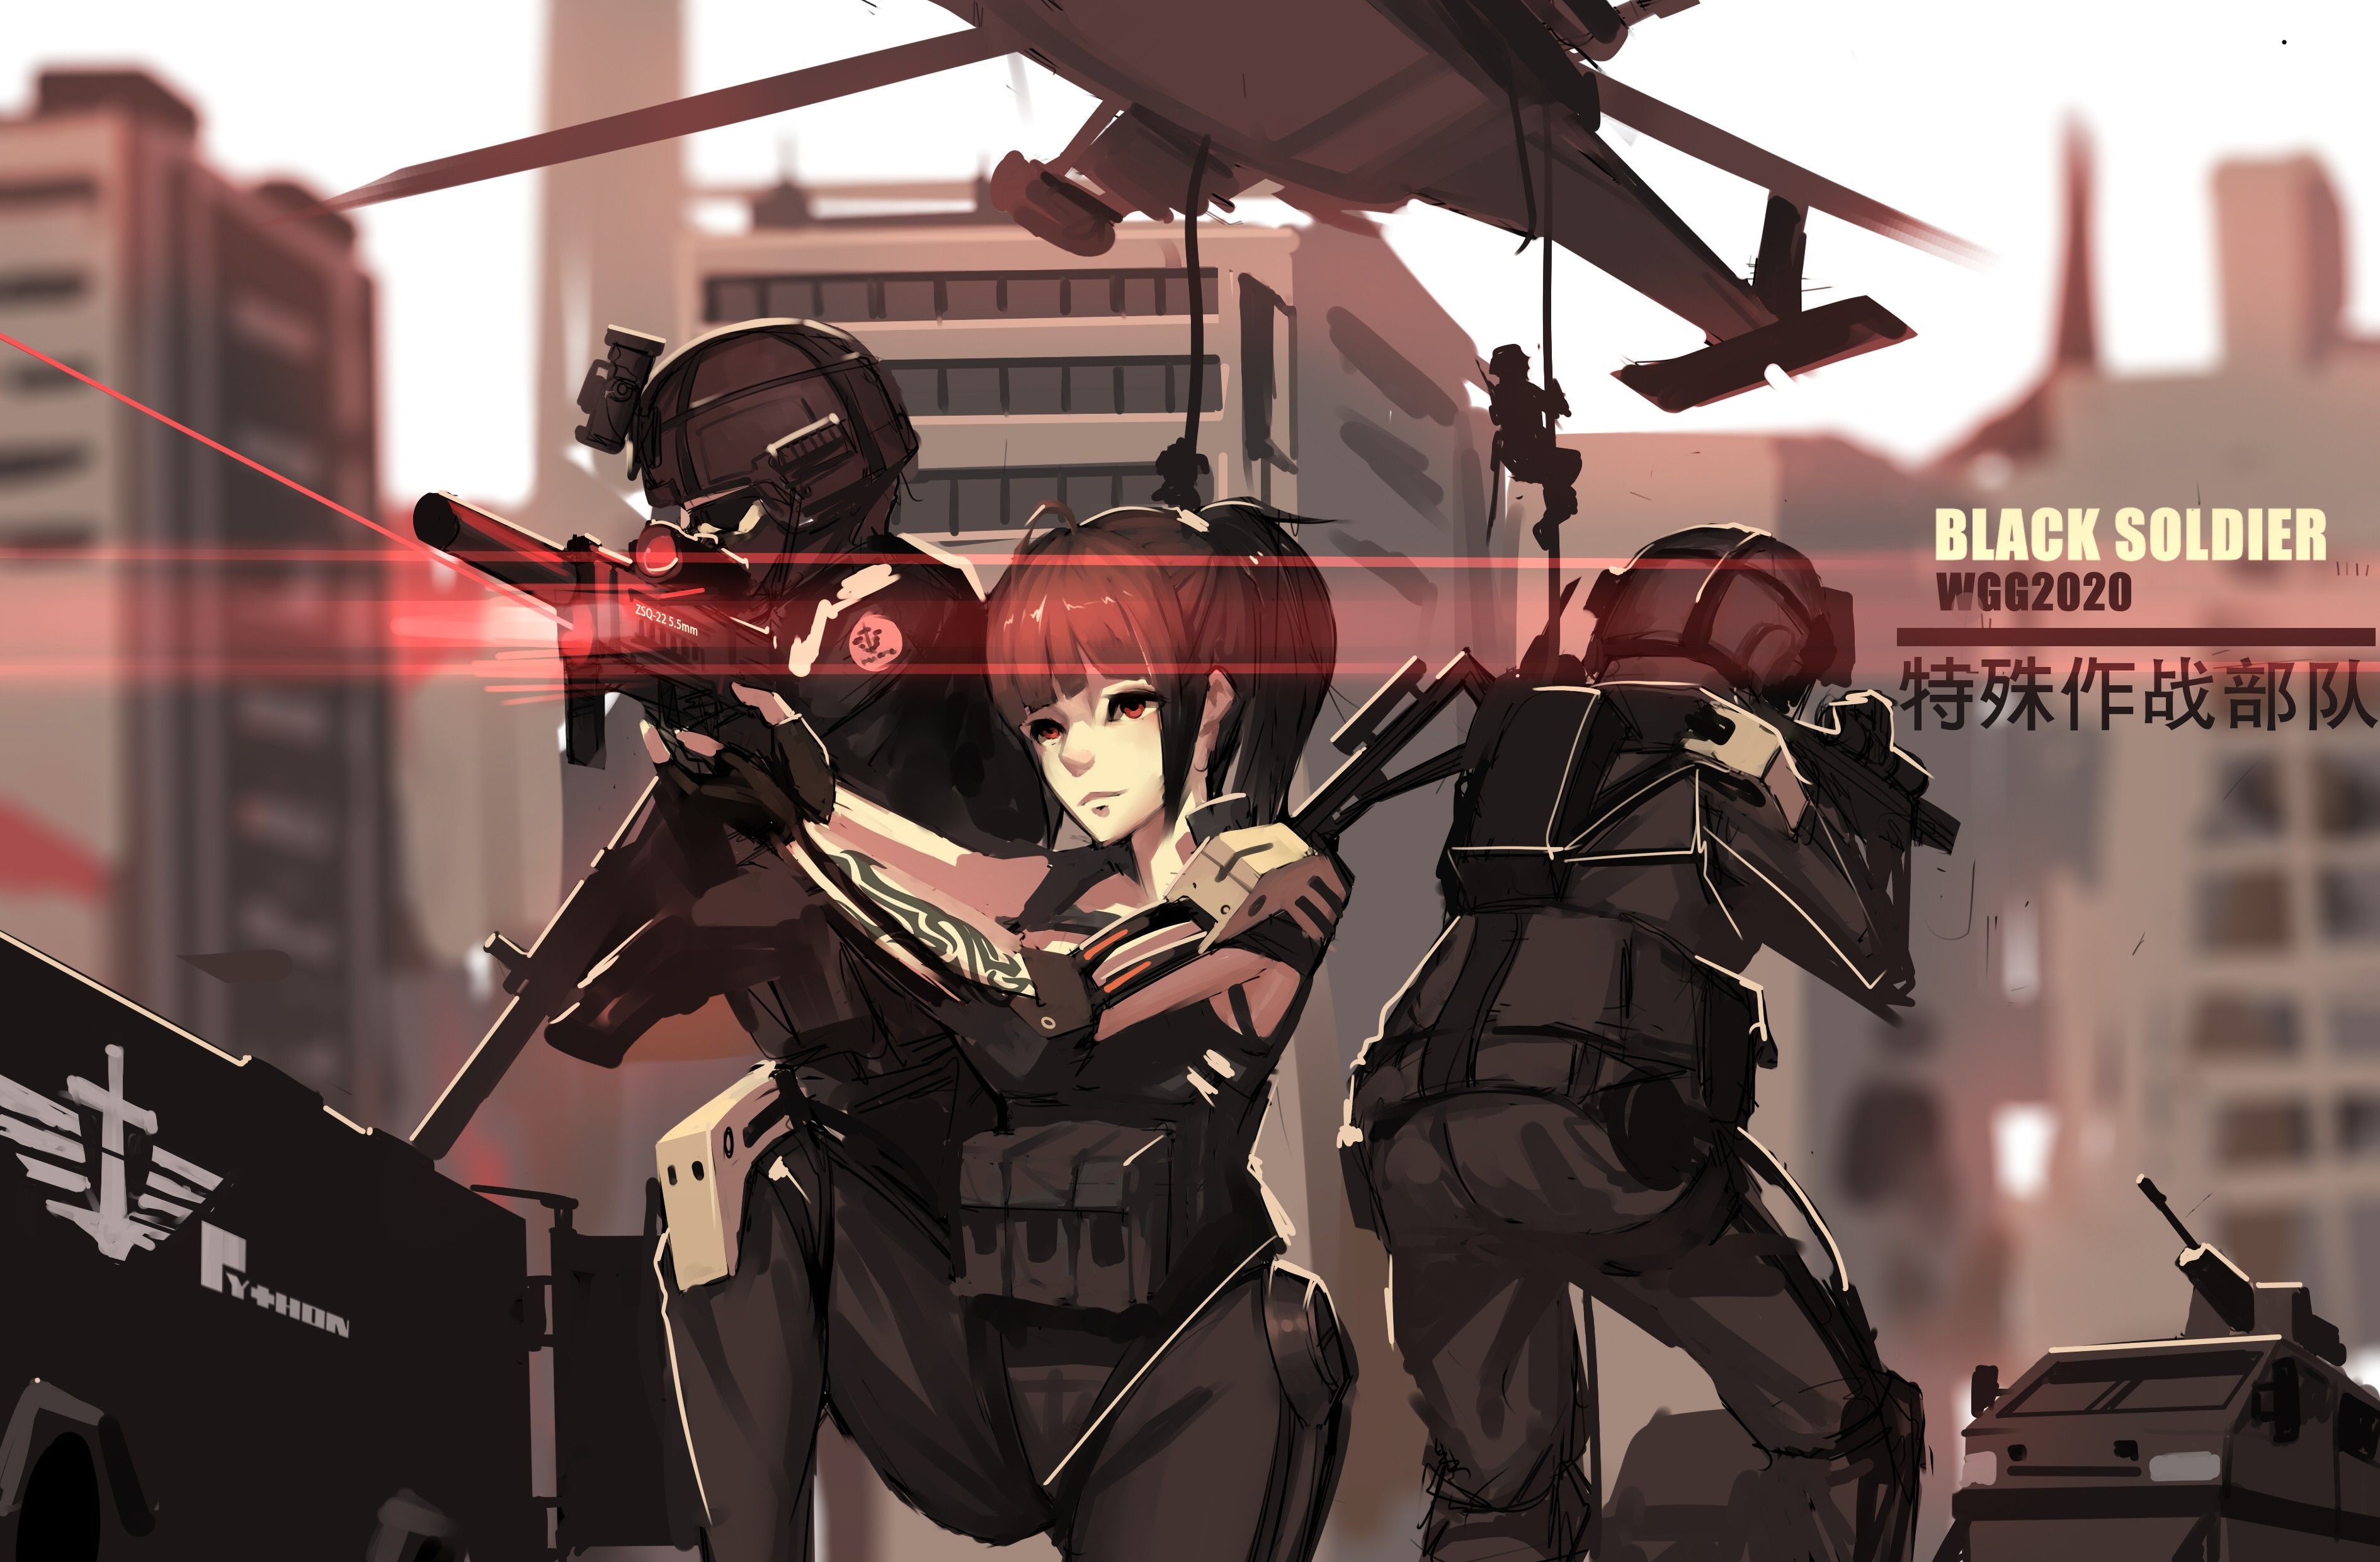 Anime Anime Girls Weapon Gun Short Hair Red Eyes Helicopters Black Soldier Wallpaper:3779x2480